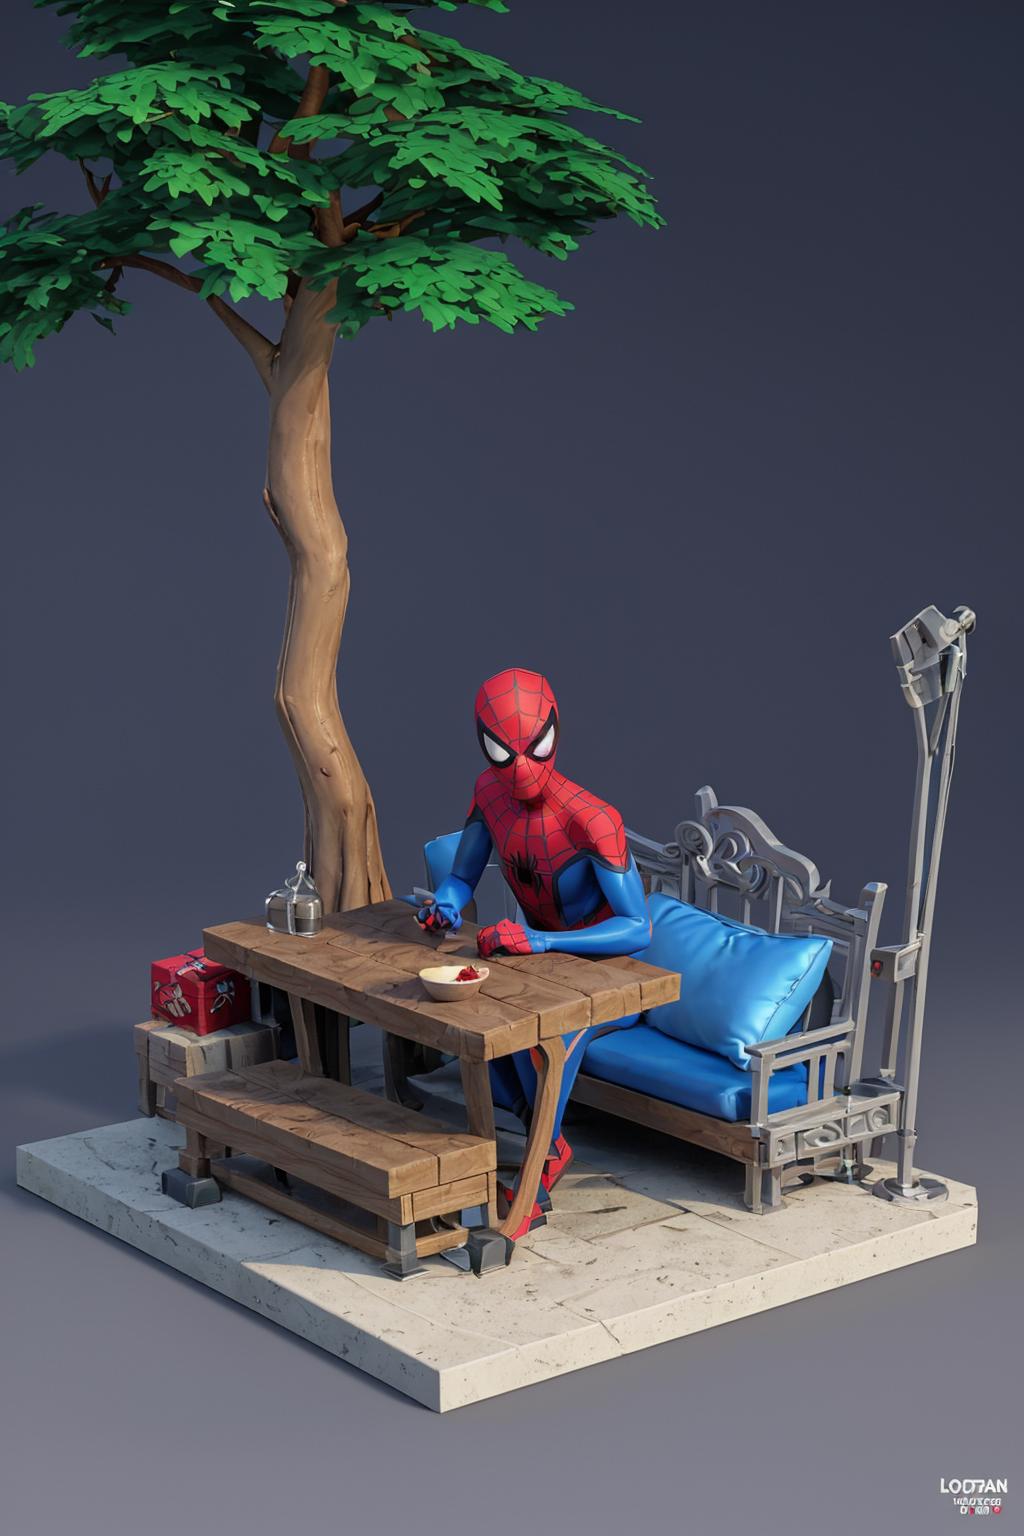 Spider-Man sitting on a couch under a tree, posed with a spoon in his hand.